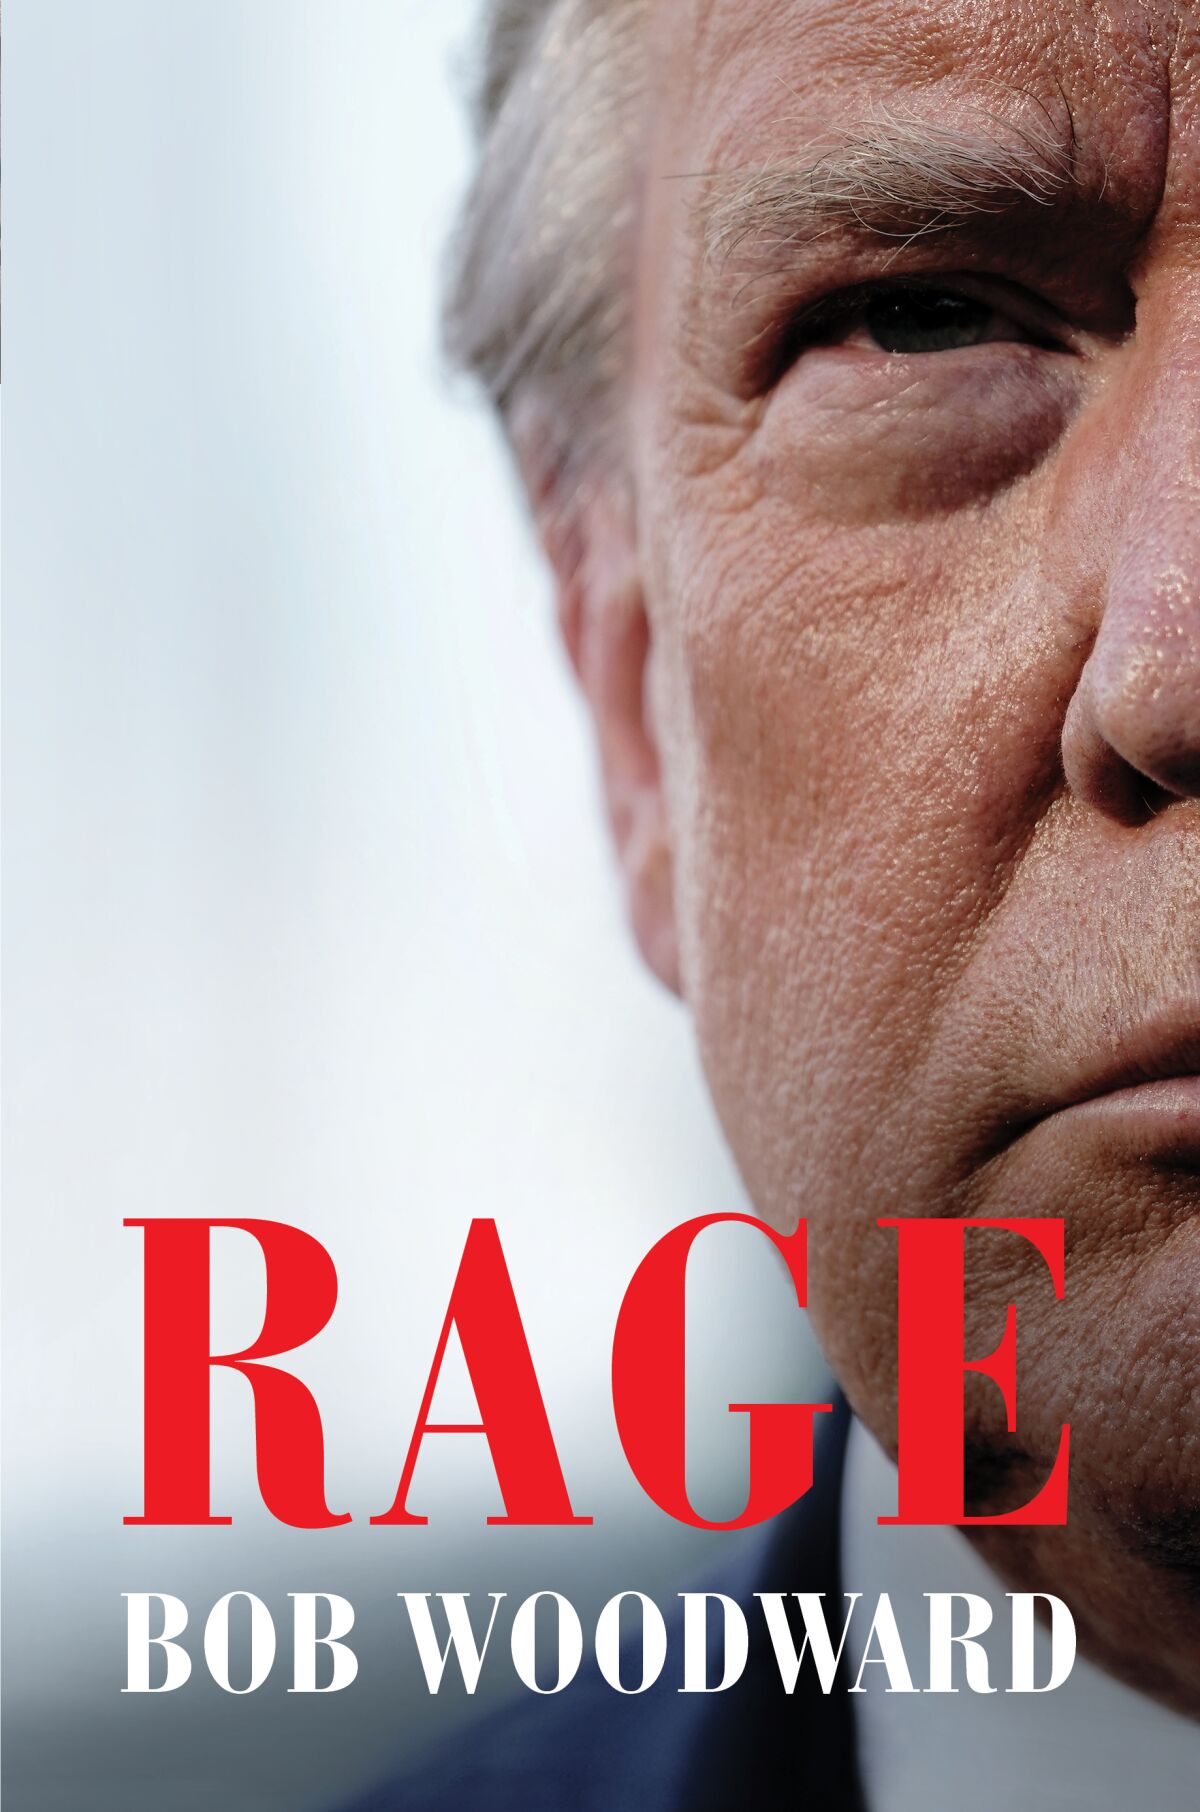 Book jacket for Bob Woodward’s of “Rage”. 